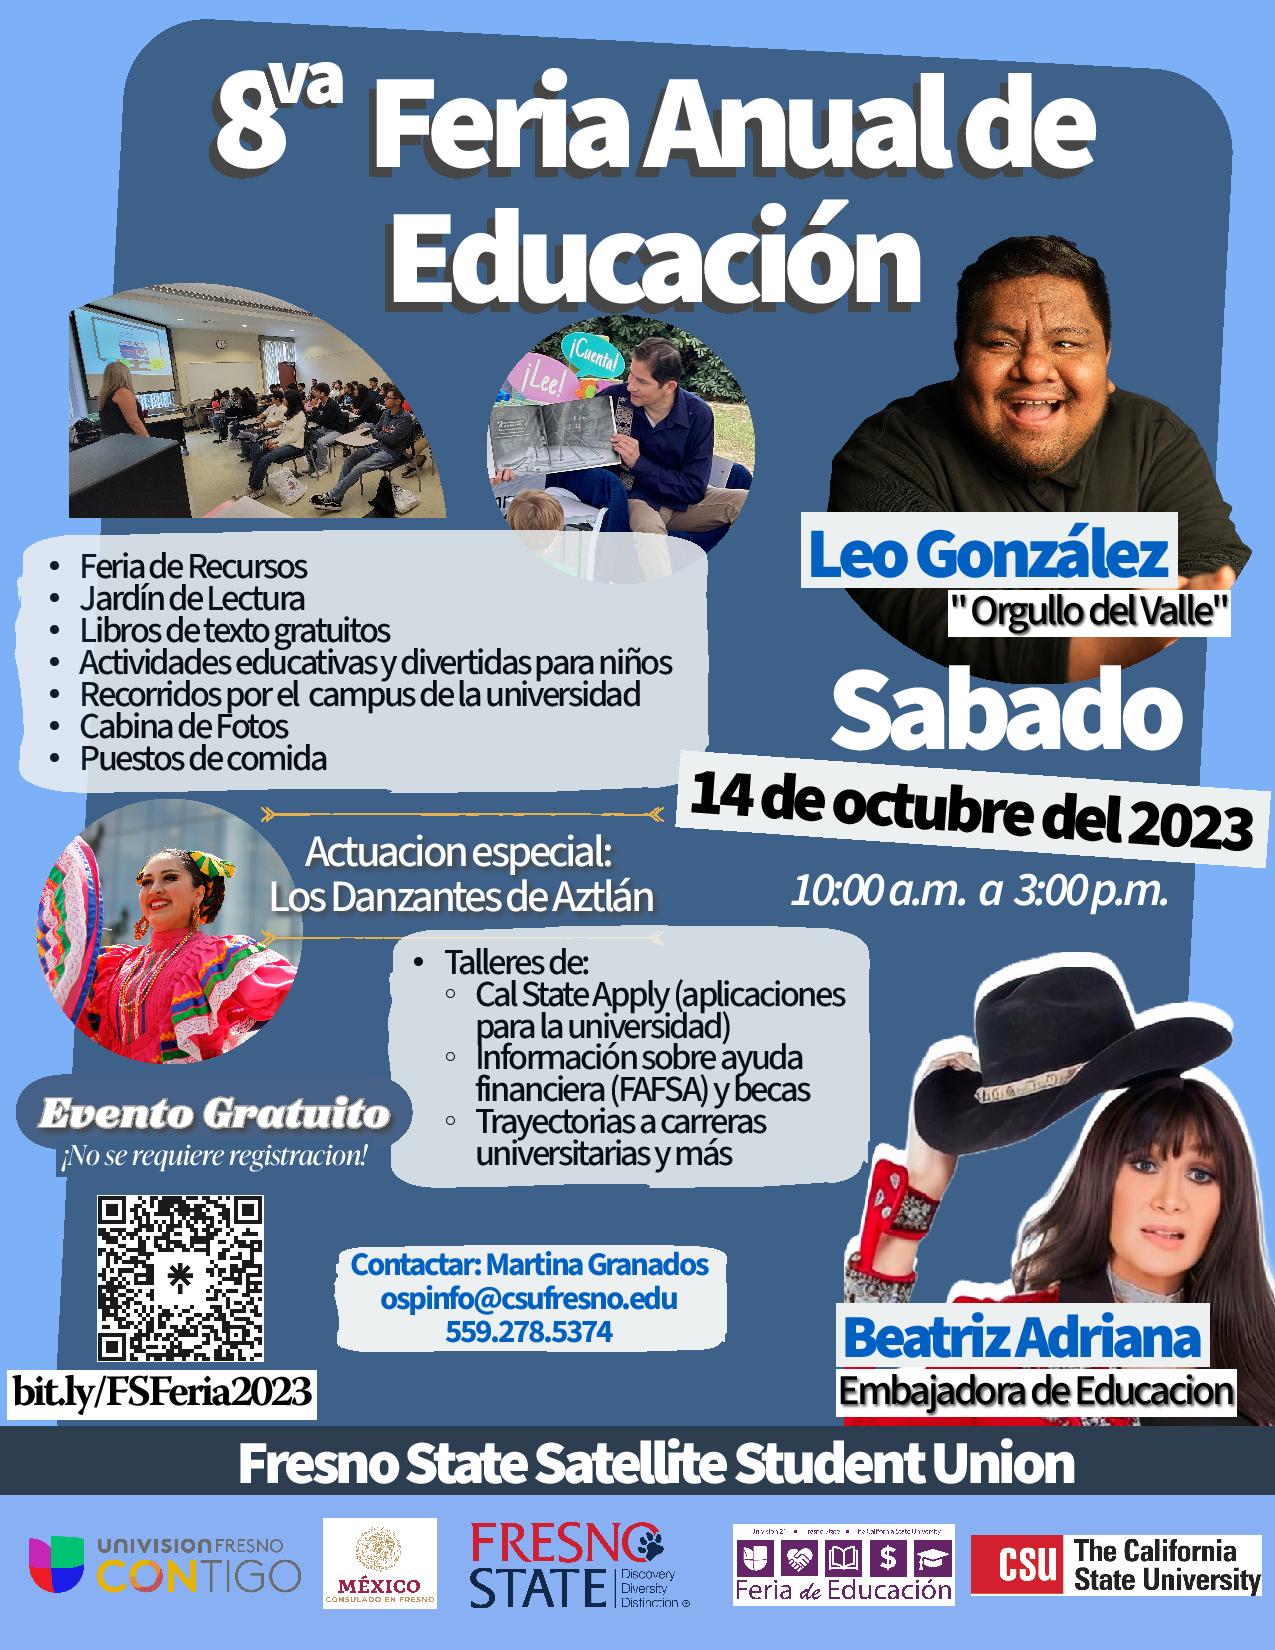 feria event flyer for saturday october 14, 2023 from 10 am to 3 pm at the satellite student union